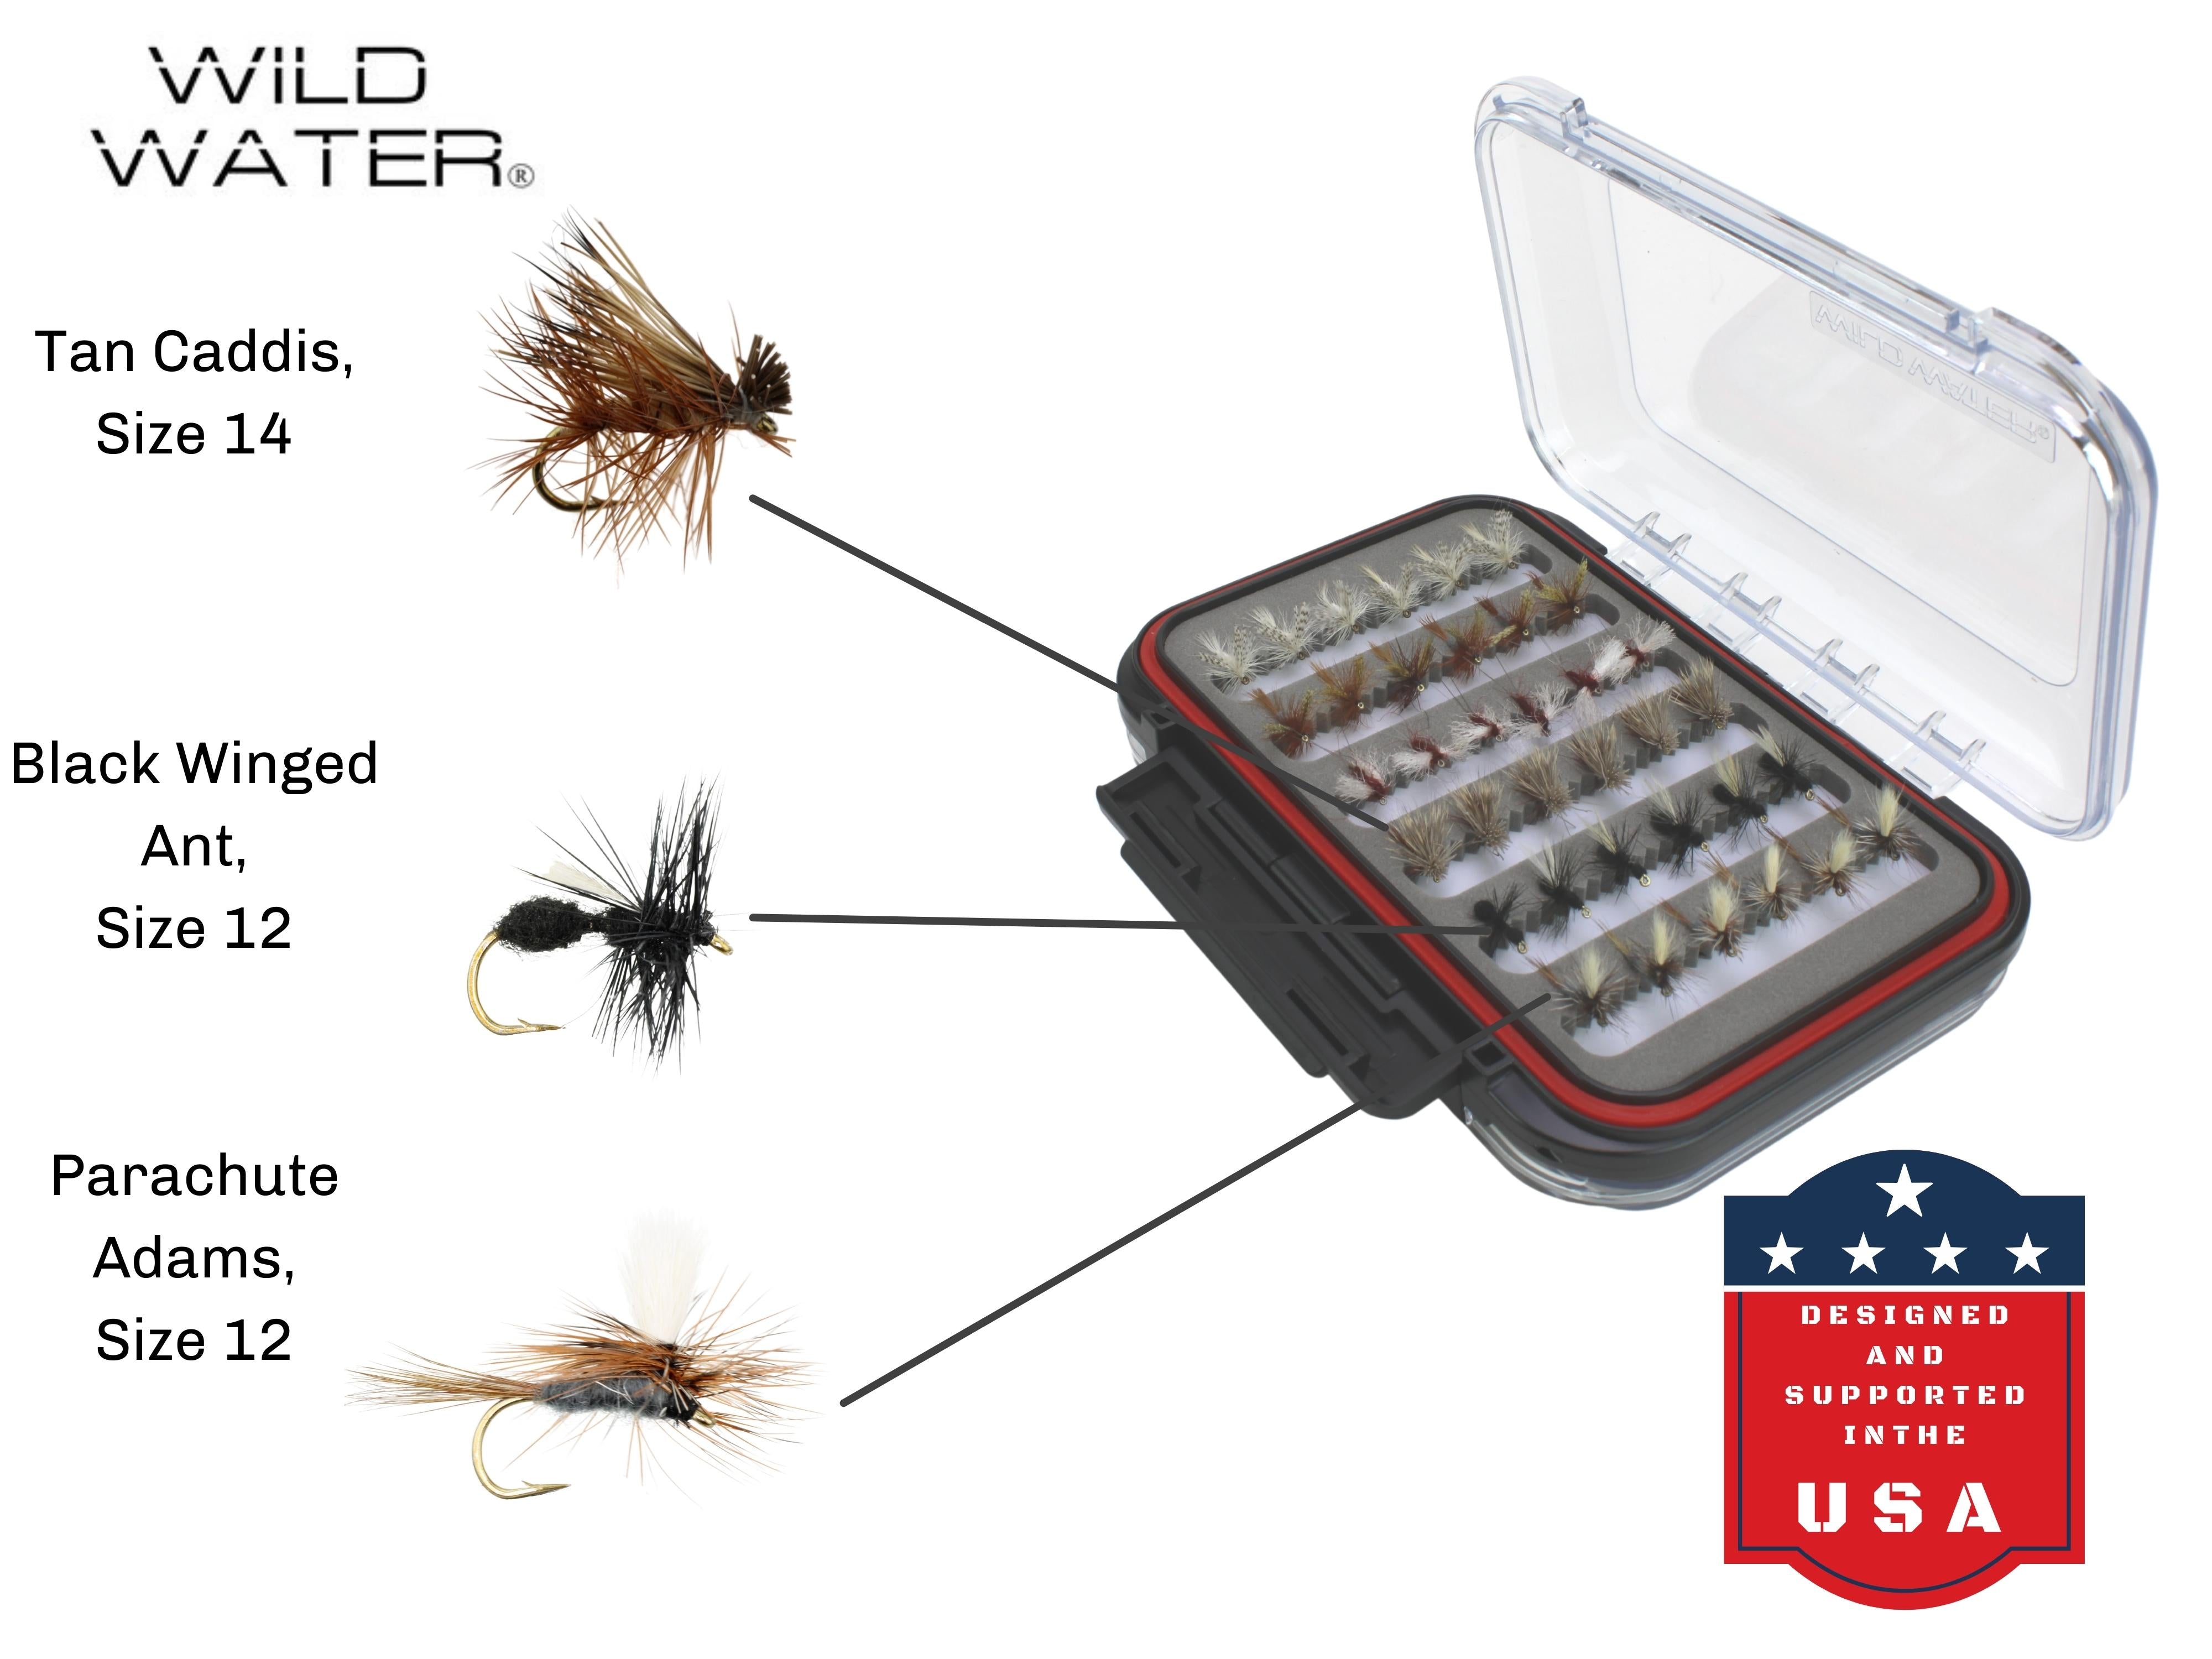 Wild Water Dry and Nymph Assortment, 66 Flies with Large Fly Box